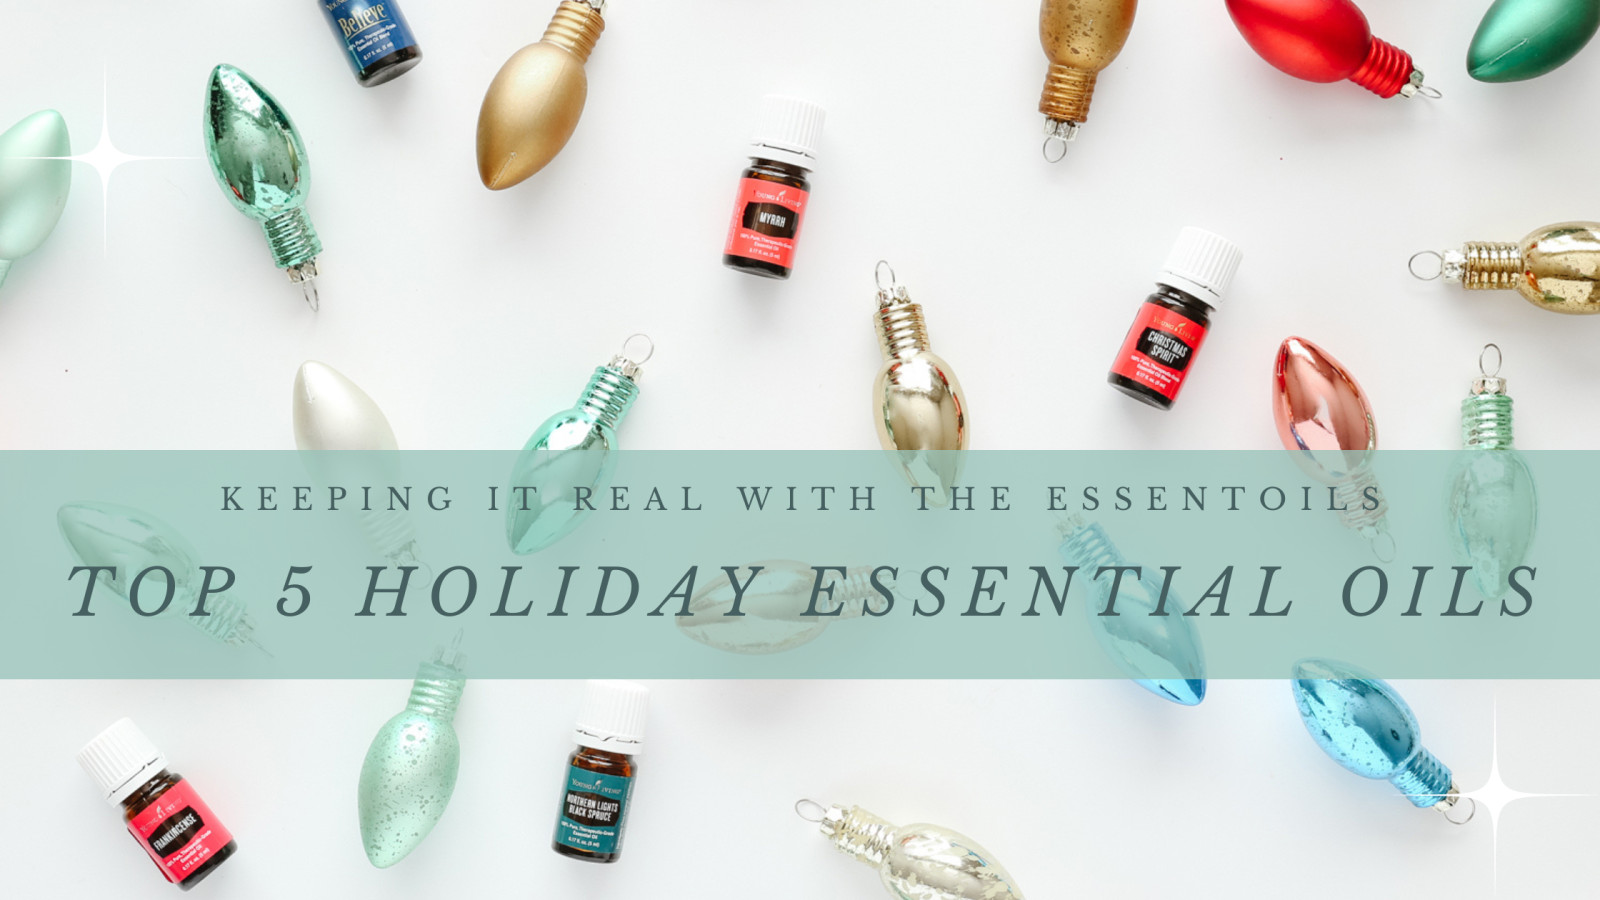 My Top 5 Holiday Essential Oils